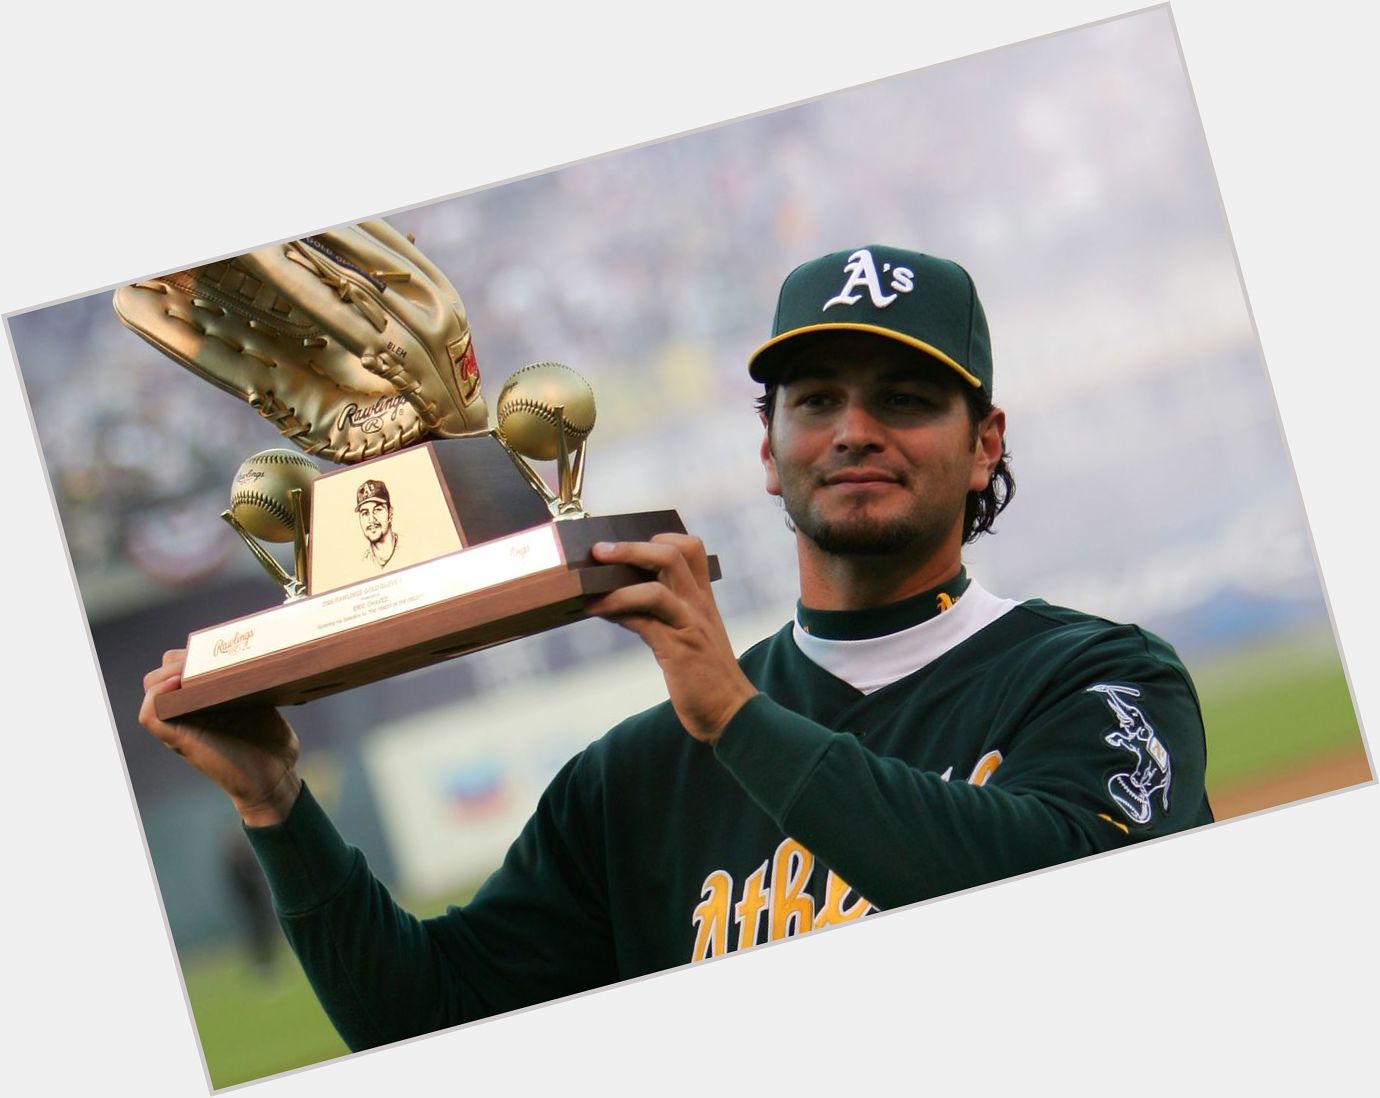 Happy 44th Birthday to former third baseman and six-time Gold Glove Award winner, Eric Chavez!  